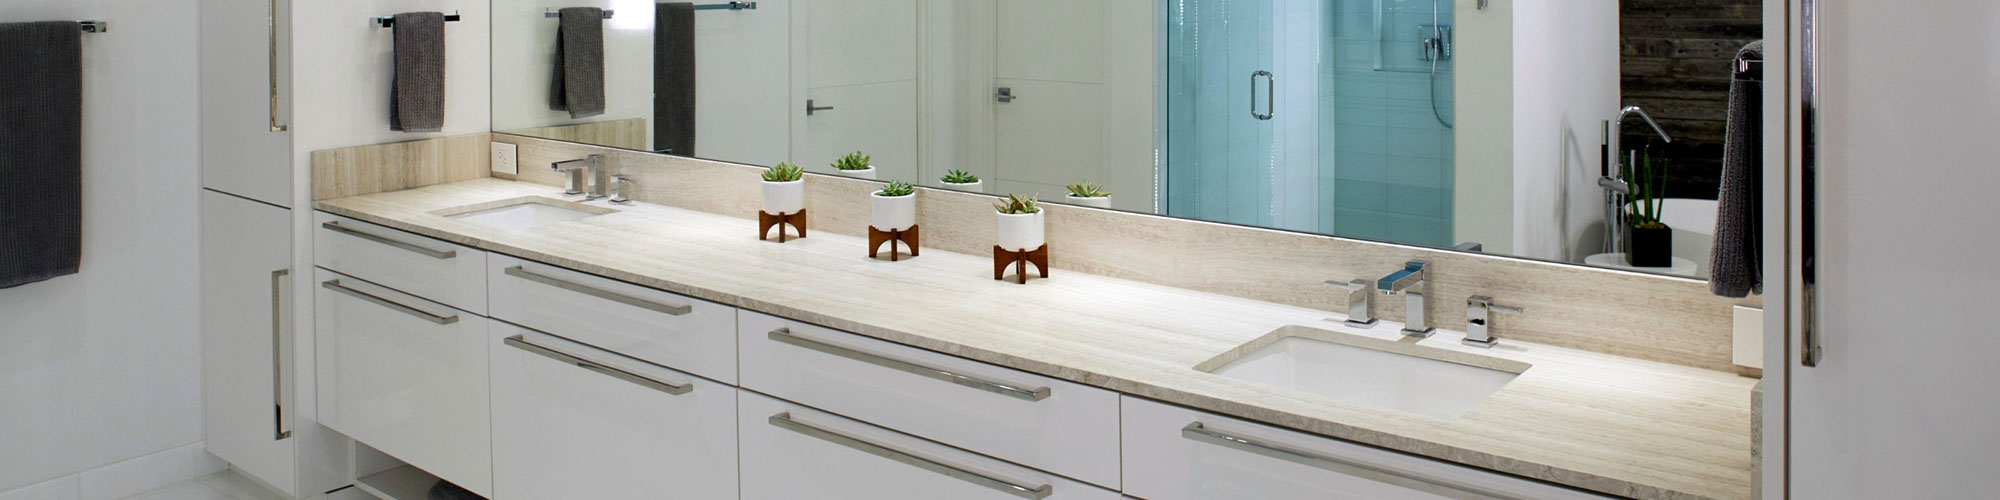 Modern bathroom design with limestone countertop vanity, white cabinets, silver drawer pulls, and 3 small succulents in planters.